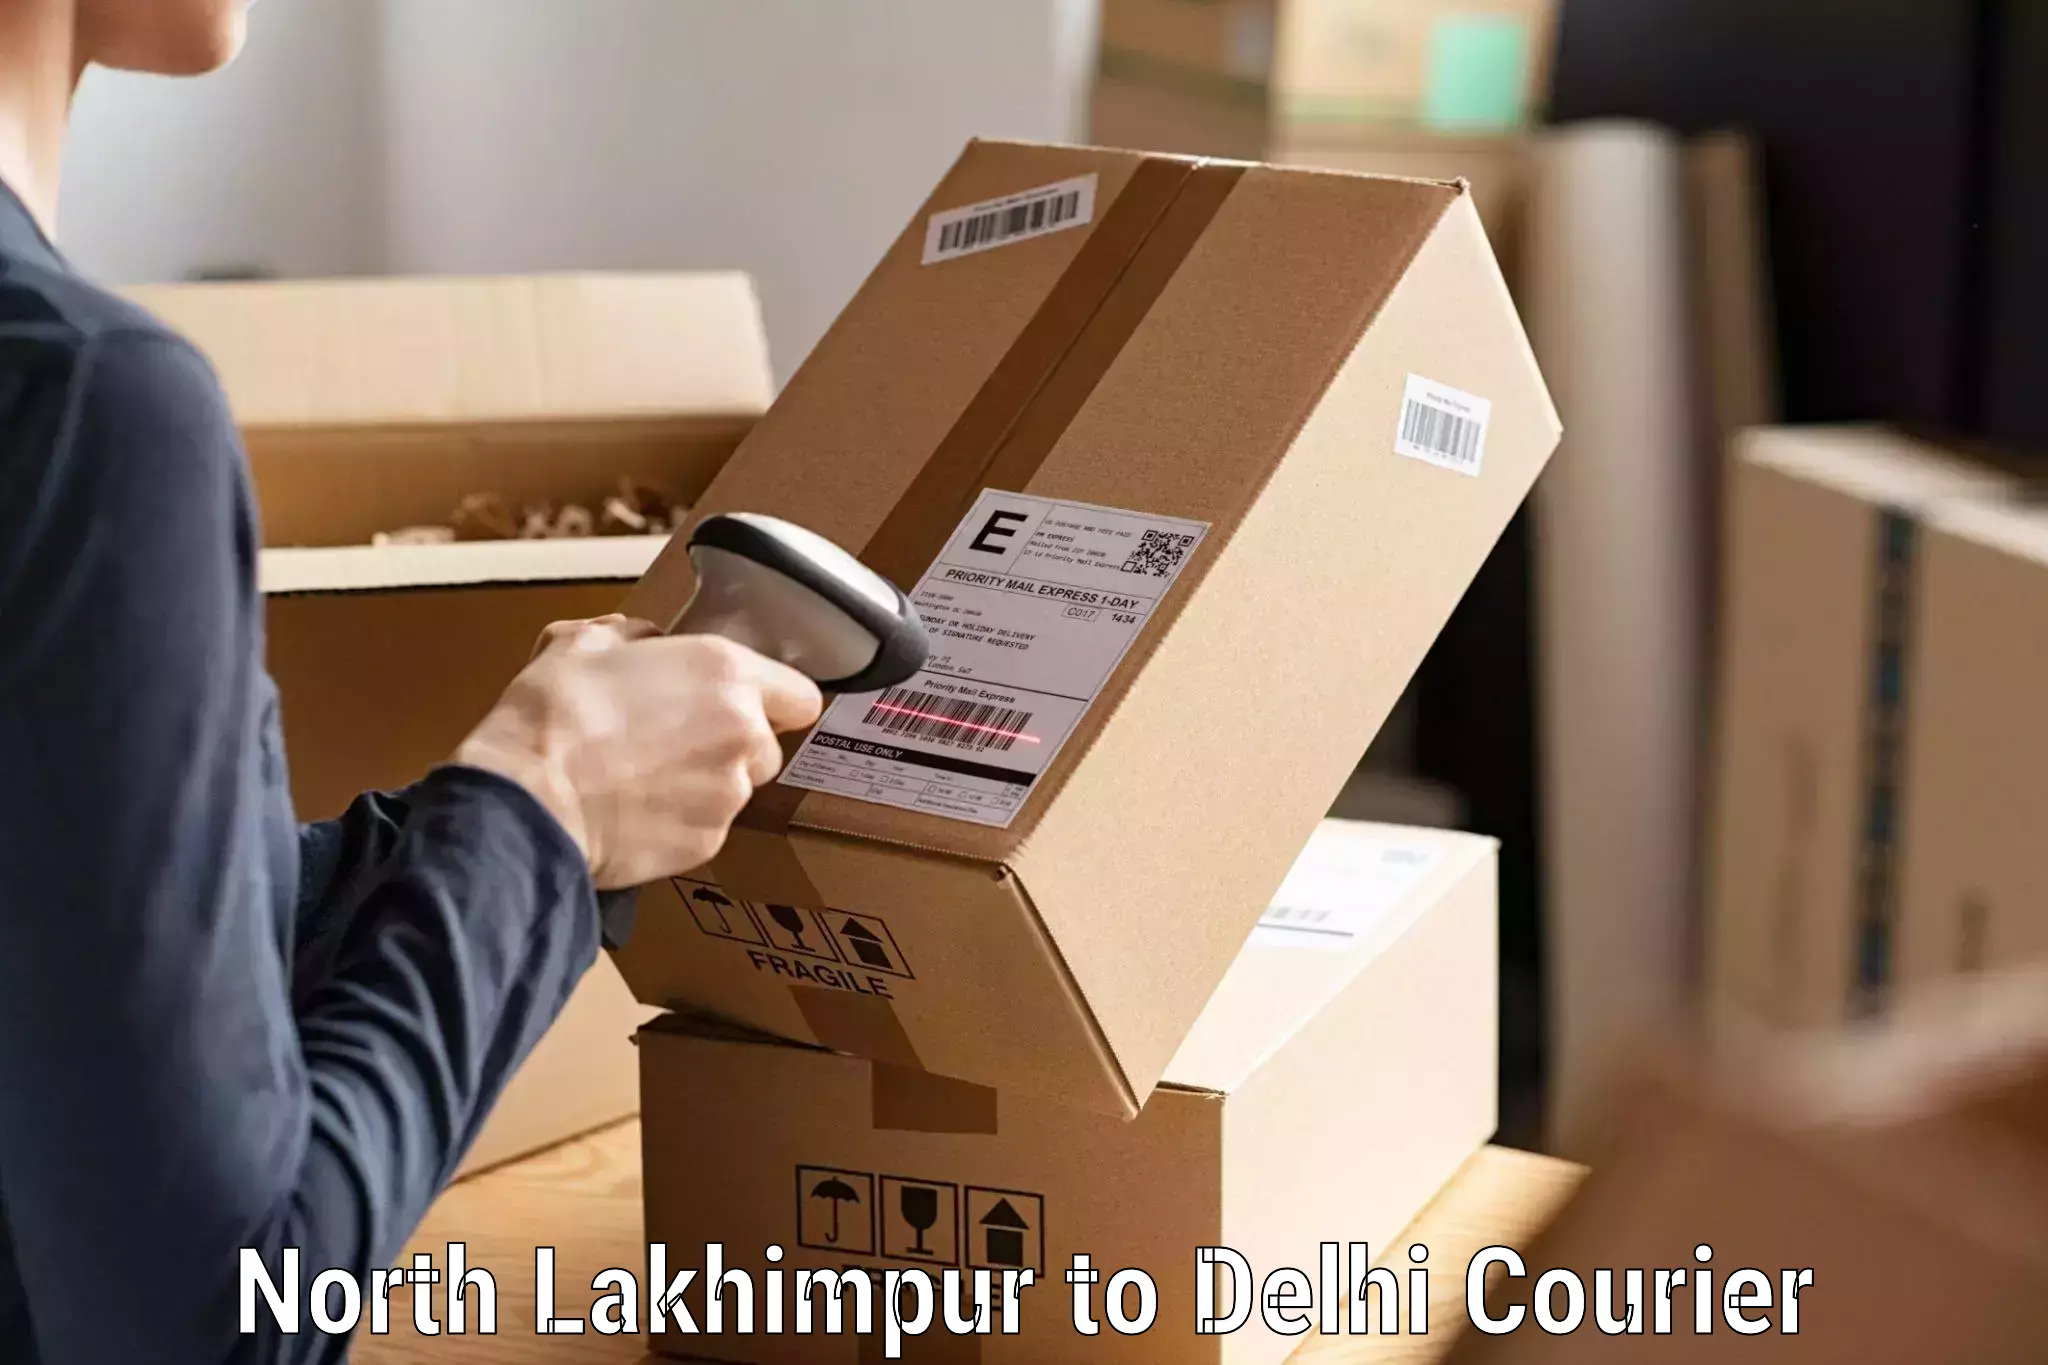 Online shipping calculator North Lakhimpur to NCR